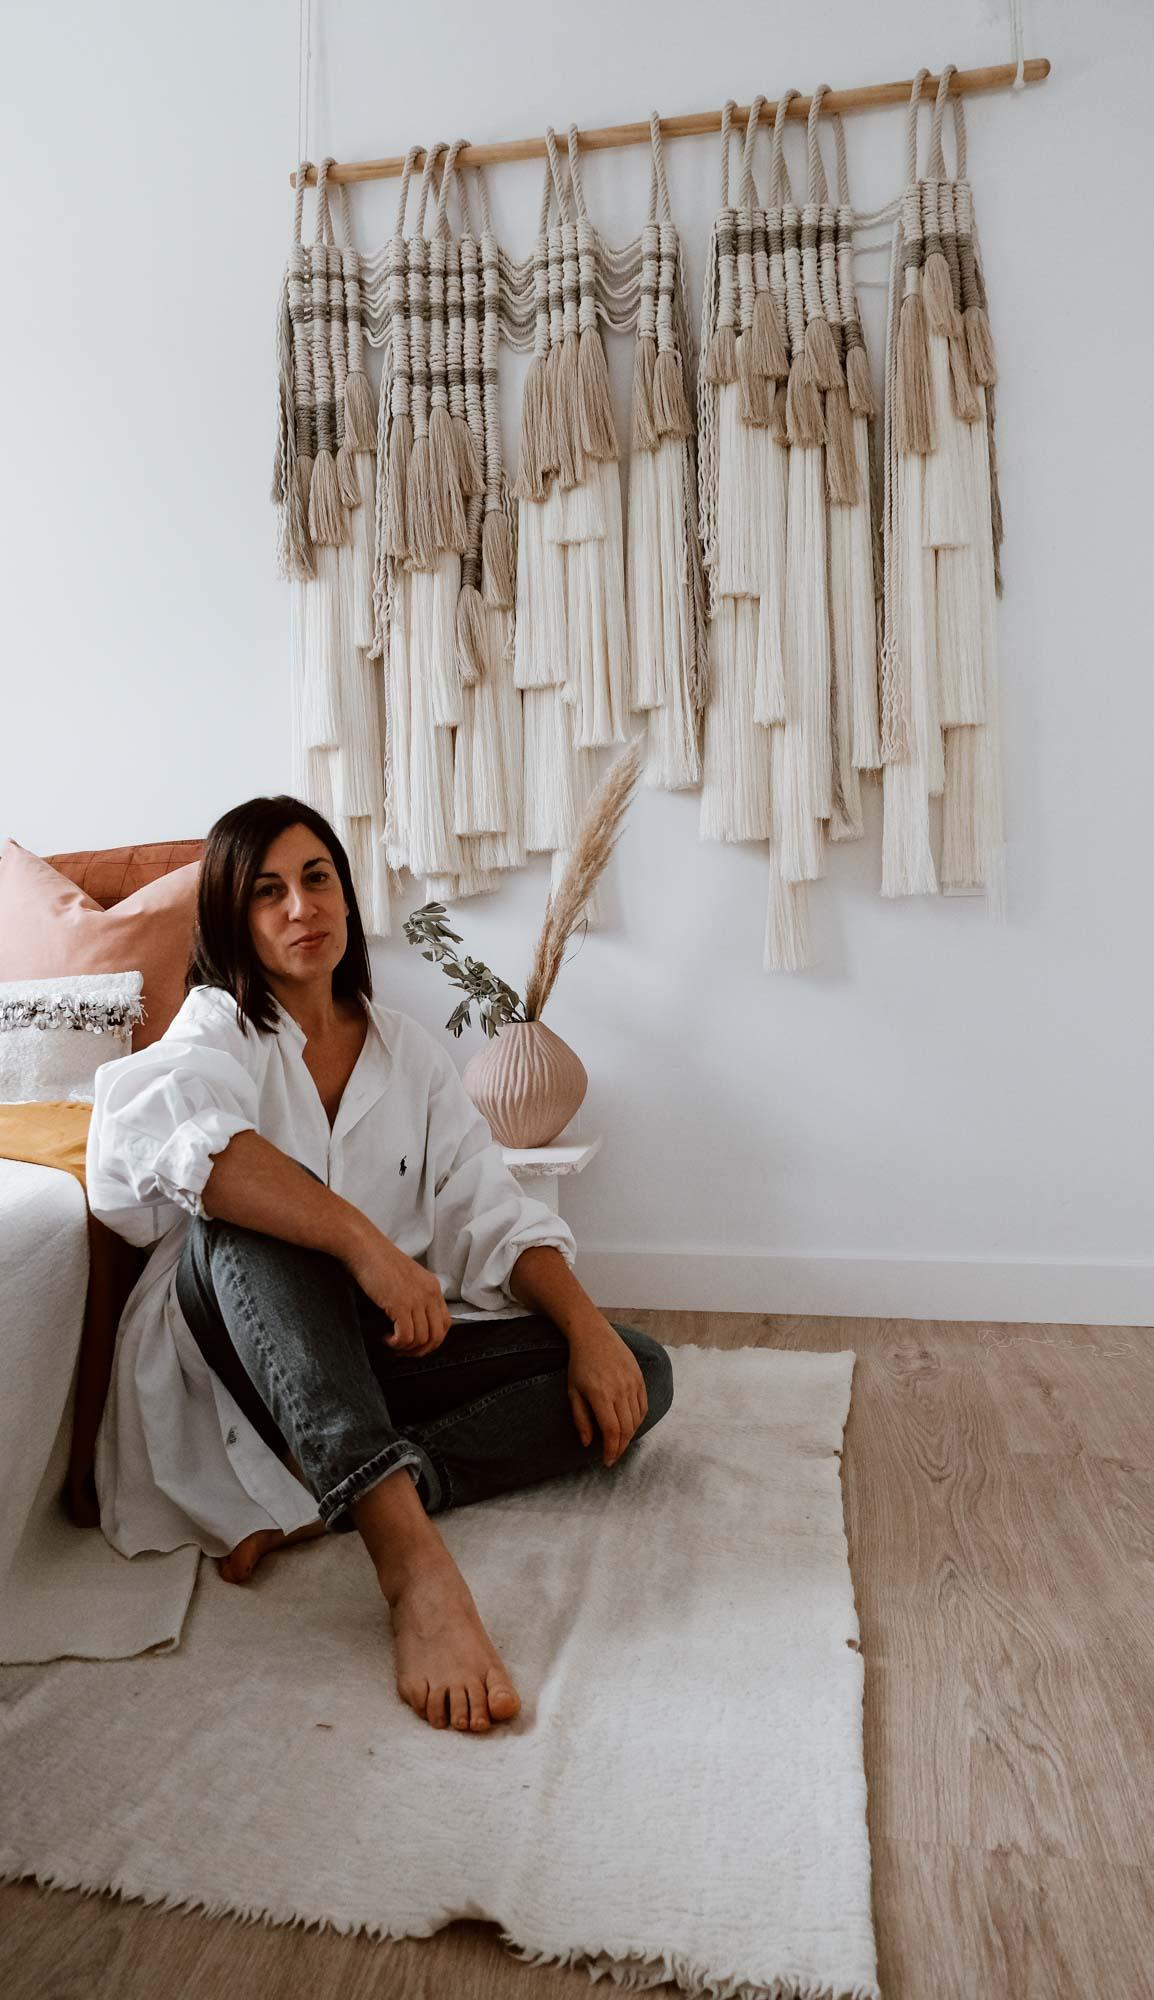 I created this Macrame wall hanging as a need to offer something unique, new and special. 
My idea was an Contemporary style in Neutral Tones to fit in different spaces styles, adding a sophisticated touch and also a super textural feel to the